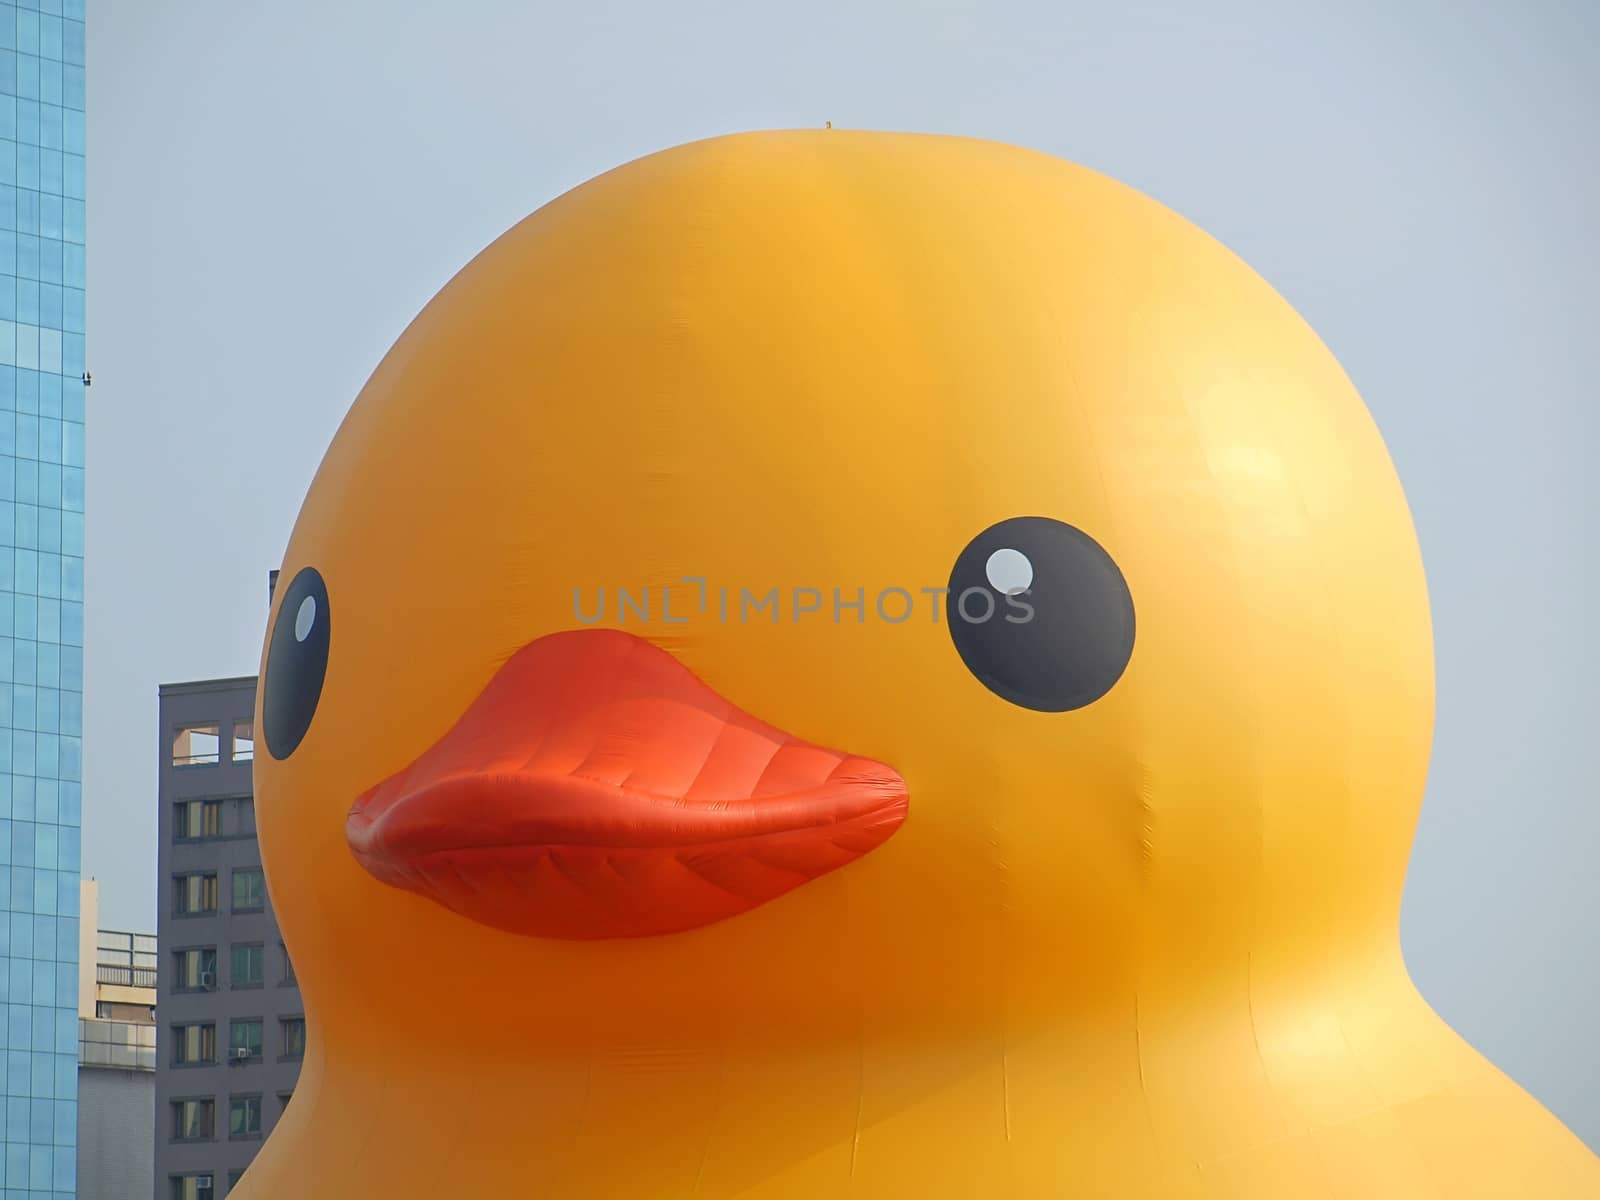 KAOHSIUNG, TAIWAN -- SEPTEMBER 28: The giant rubber duck designed by Dutch artist Hofman goes on display at the Glory Pier on September 28, 2013 in Kaohsiung